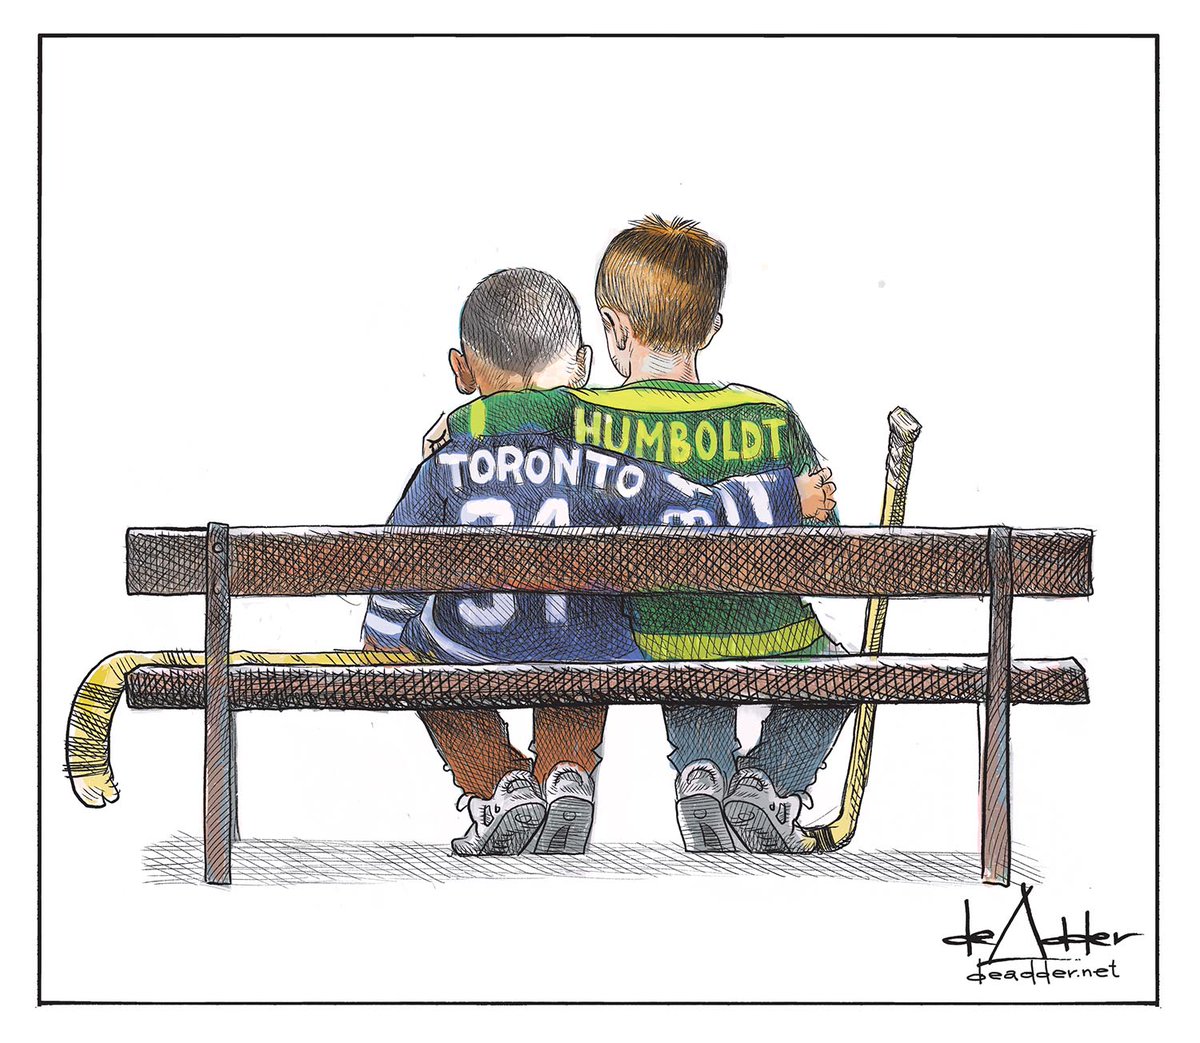 Scott Thompson: Between Humboldt and Toronto, it’s been a tough month for Canadians - image